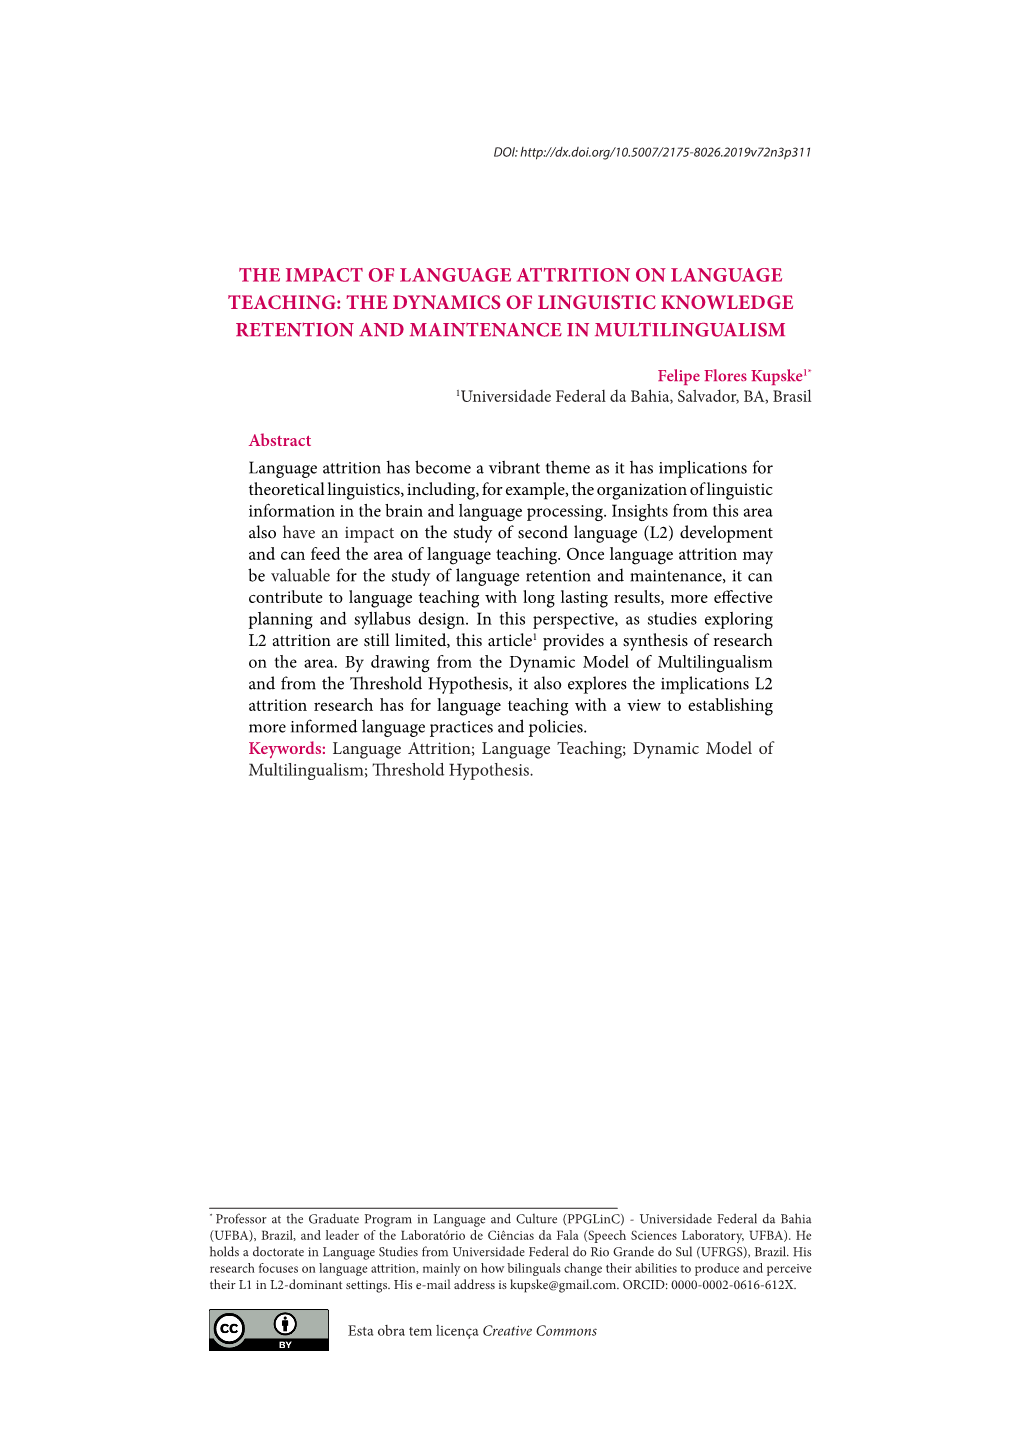 The Impact of Language Attrition on Language Teaching: the Dynamics of Linguistic Knowledge Retention and Maintenance in Multilingualism